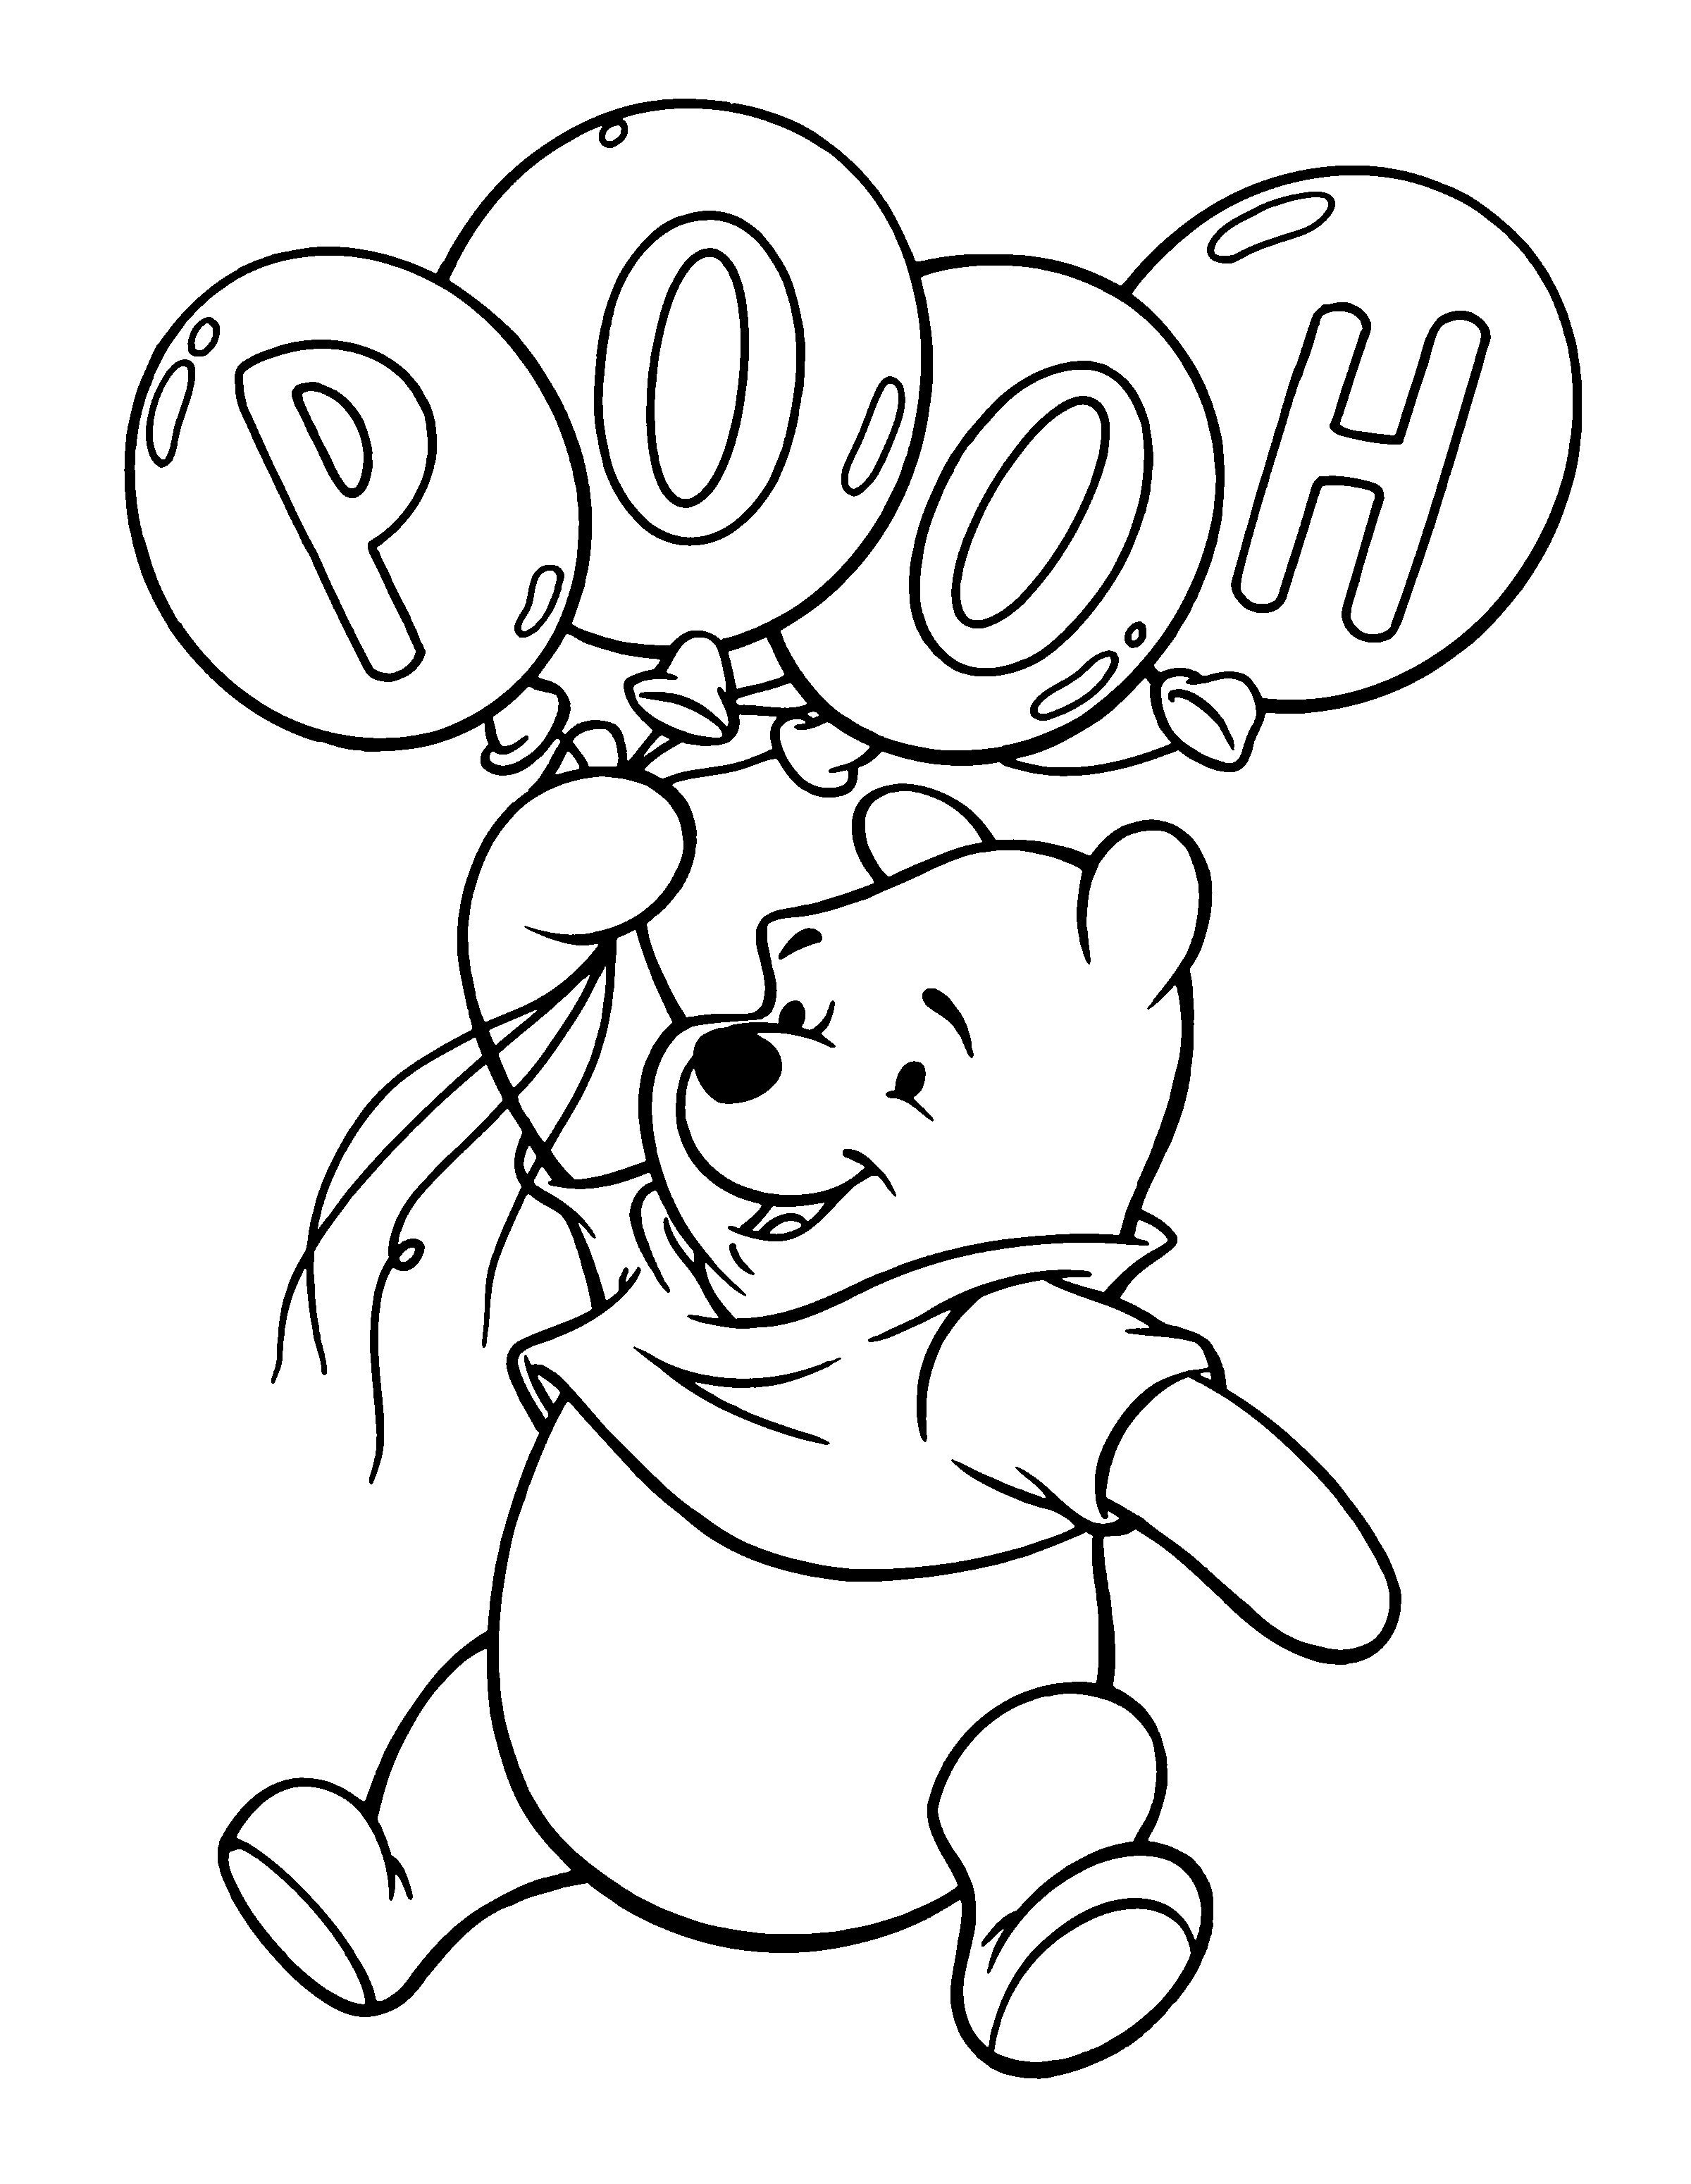 winnie-the-pooh-coloring-pages-3-coloring-kids-coloring-kids